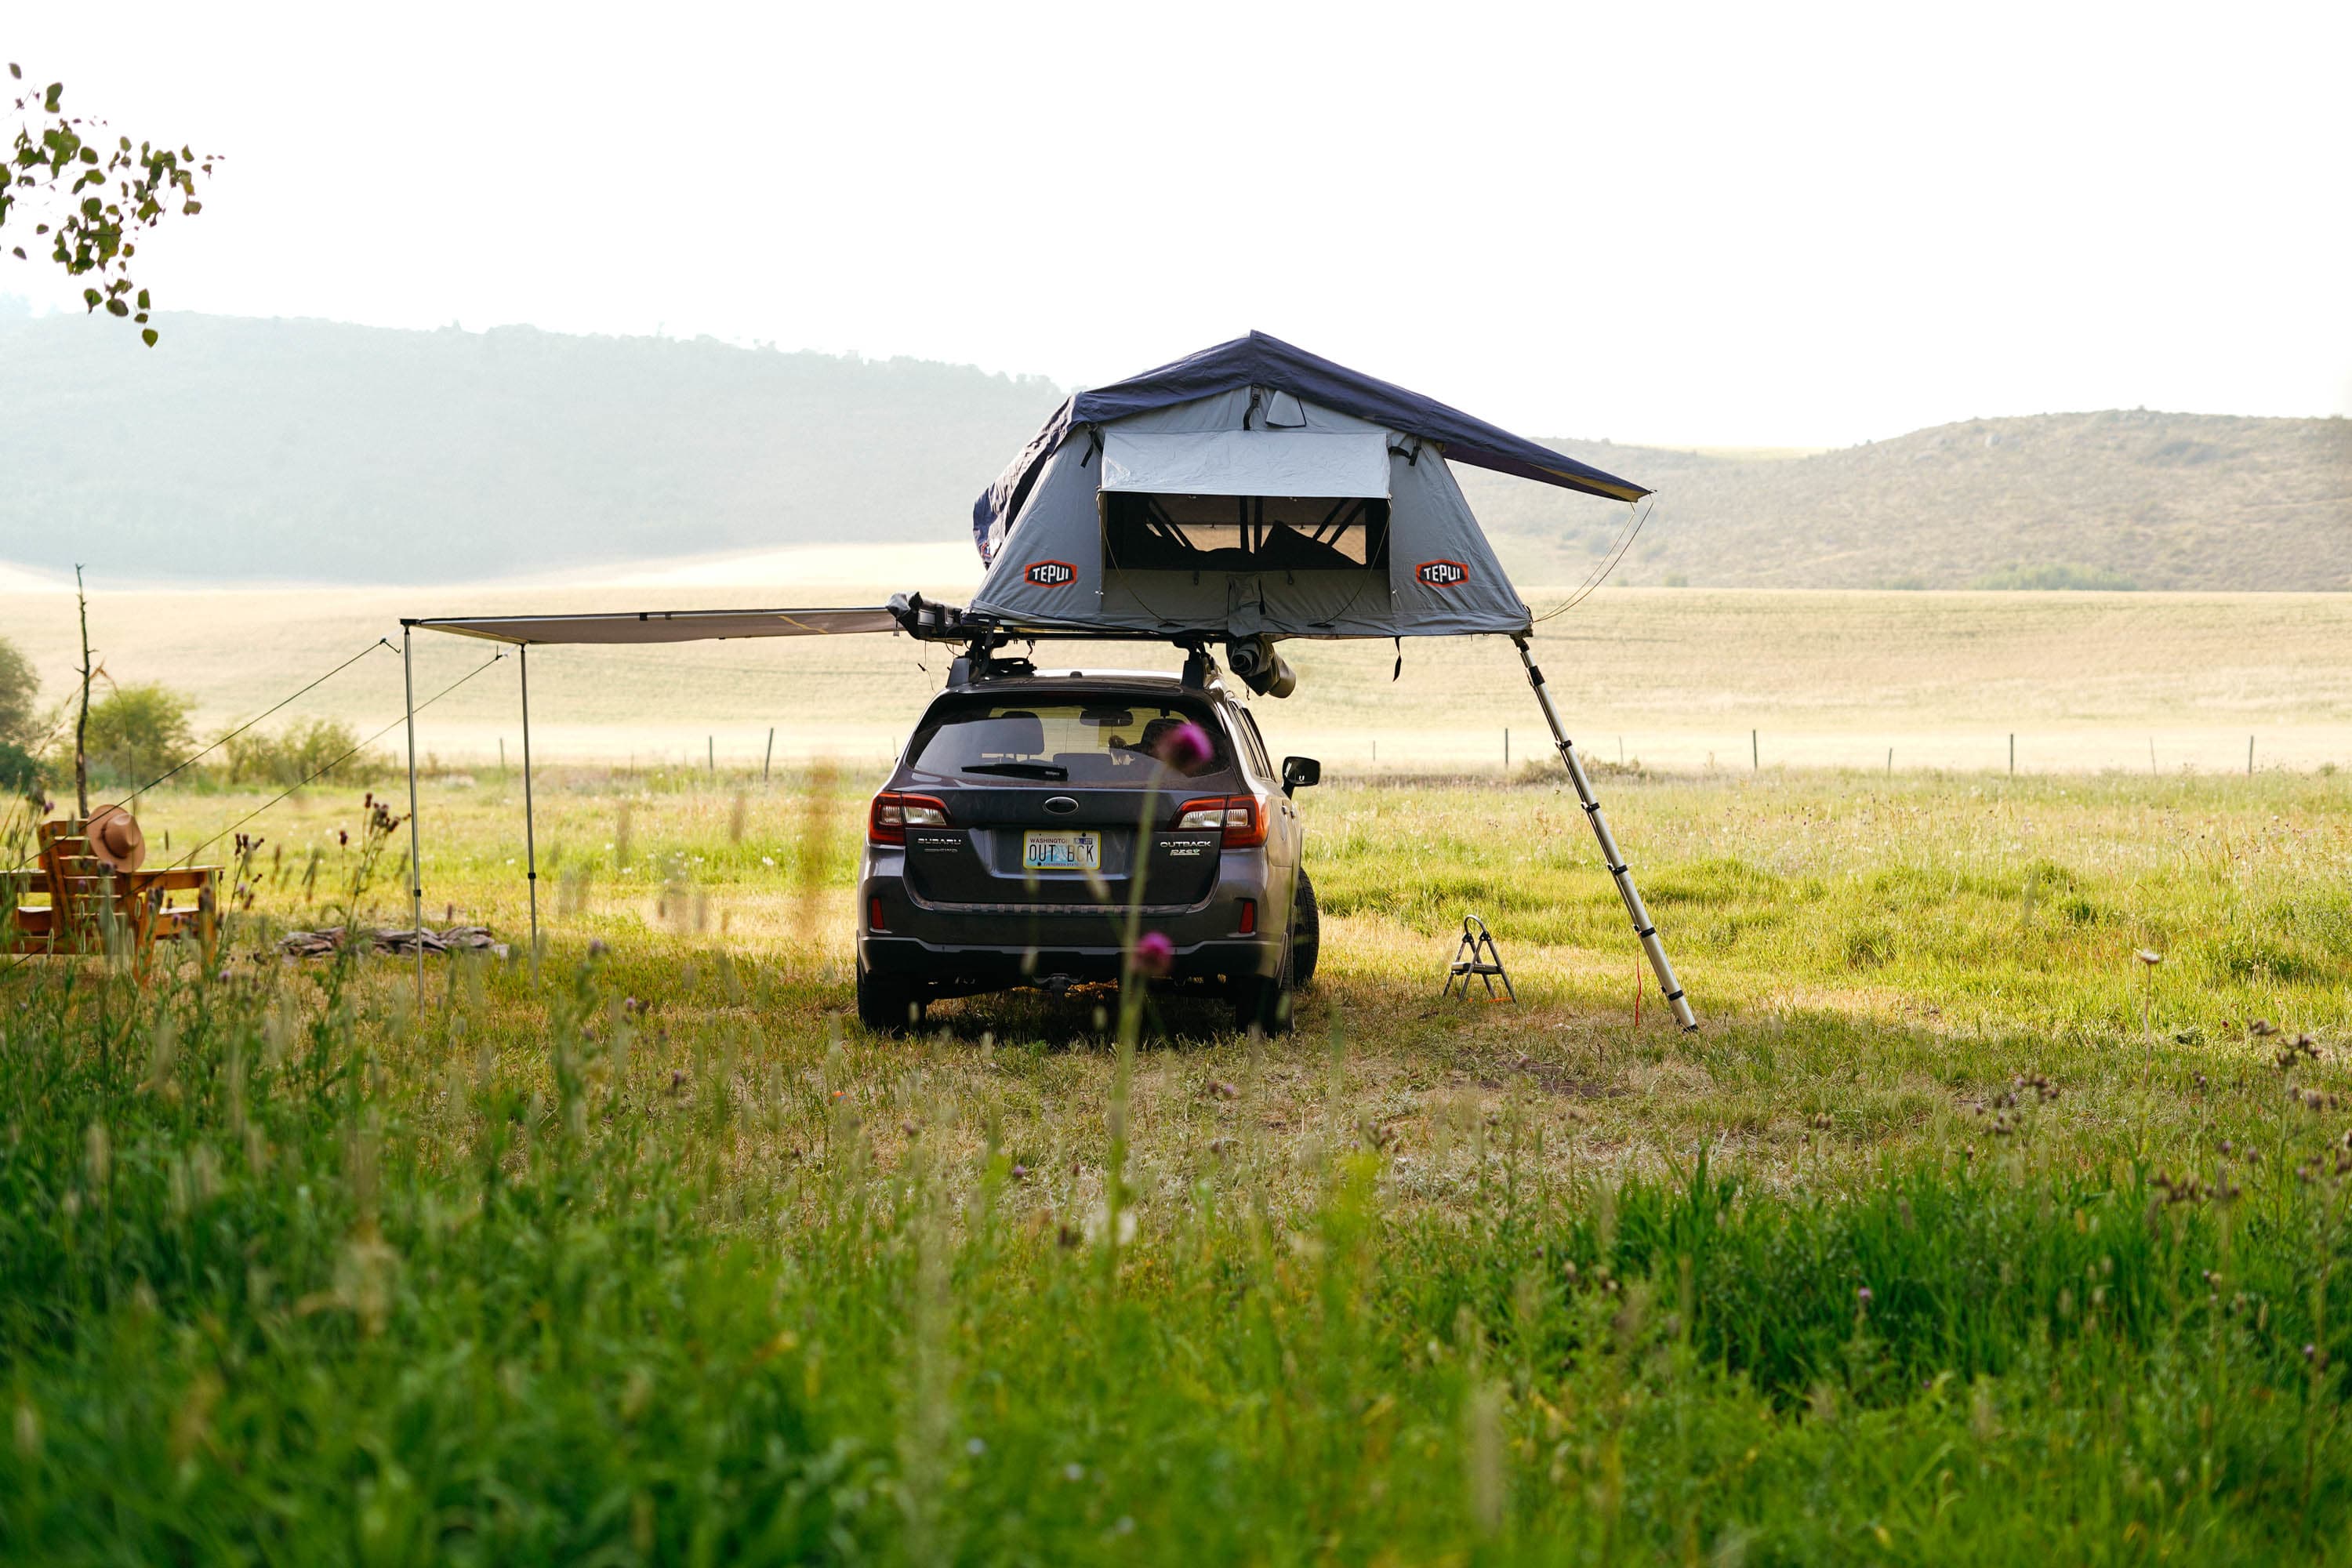 Our roof top tent was a great set up, but site #2 seems easily accessible by any vehicle.